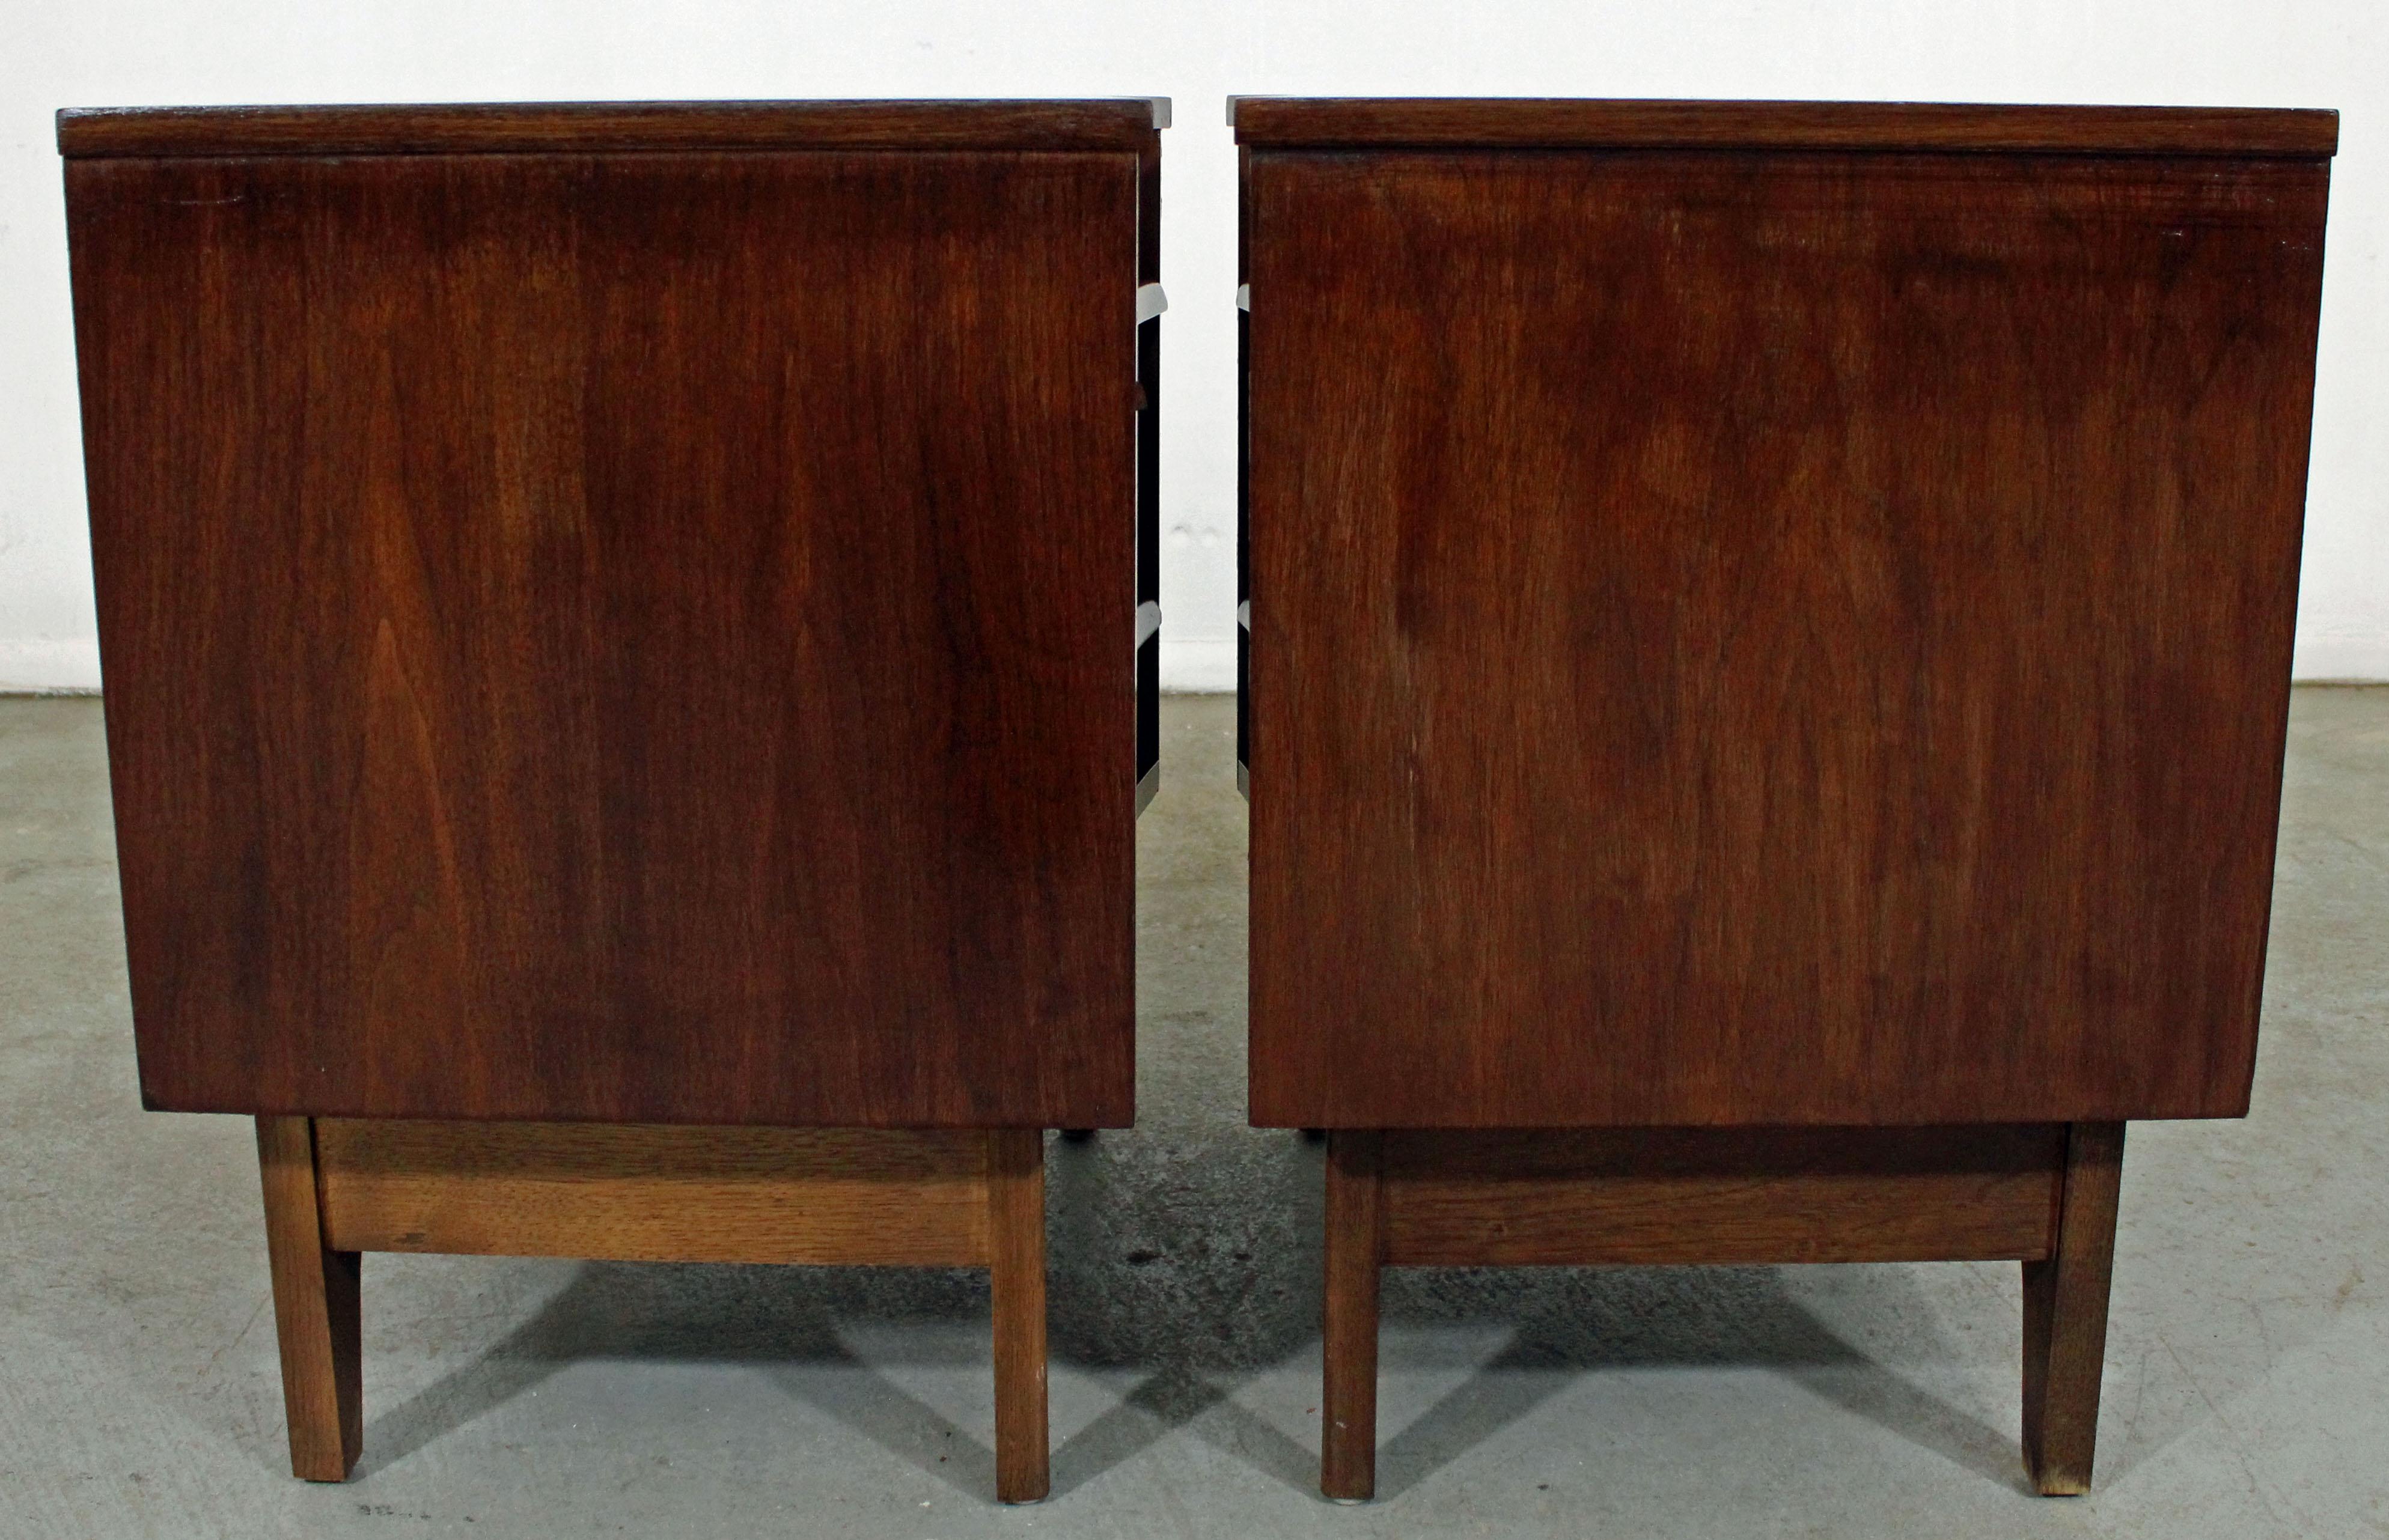 American Pair of Mid-Century Modern Sculpted Concave Walnut Nightstands